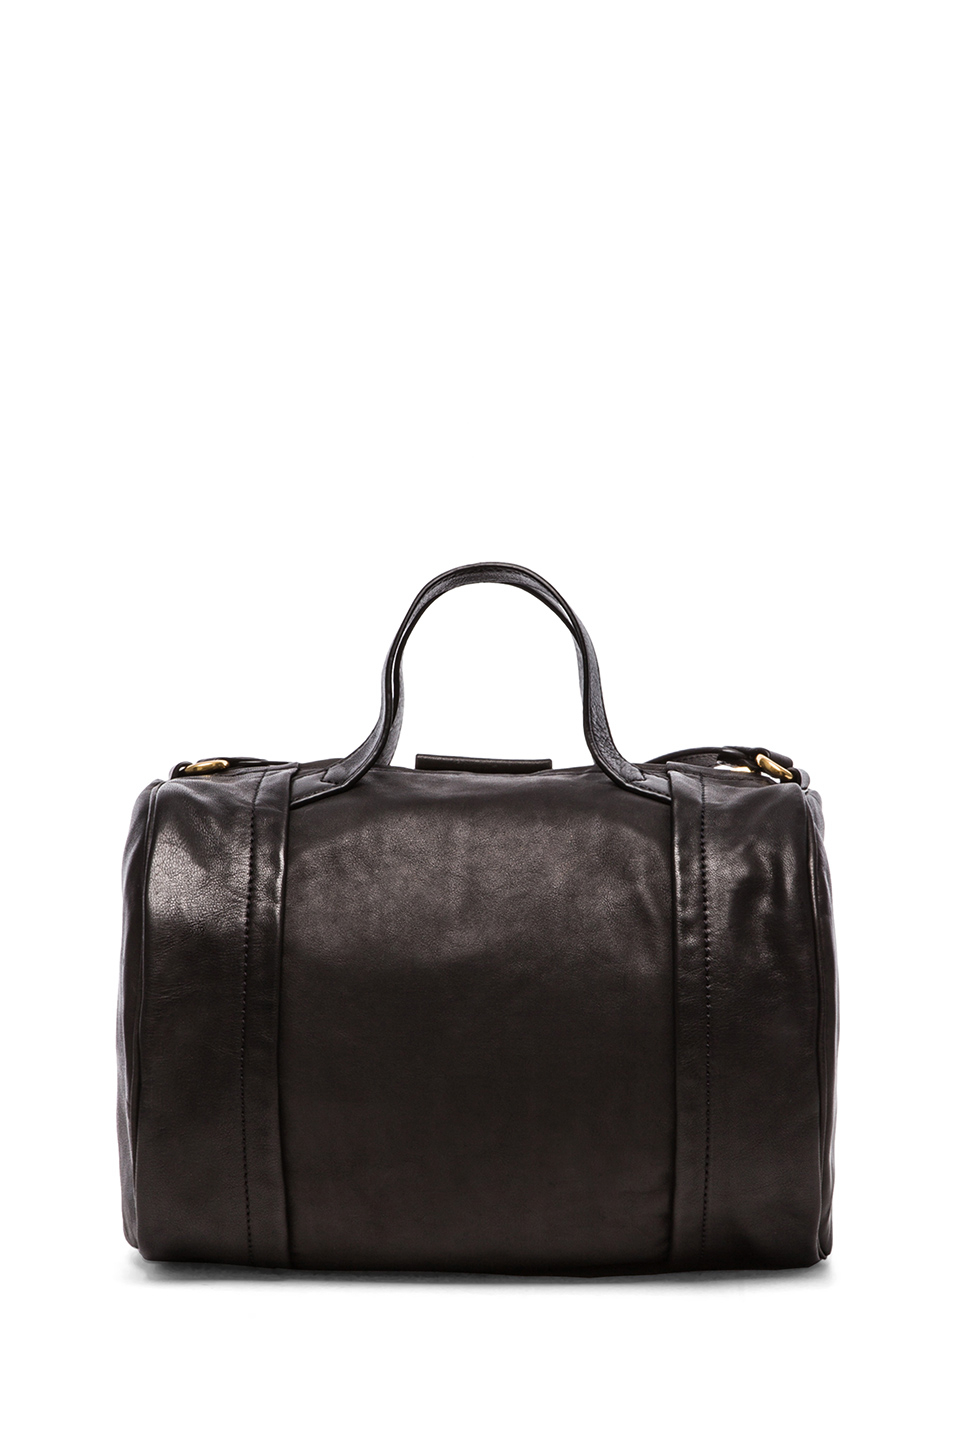 Lyst - Marc By Marc Jacobs Moto Duffle in Black